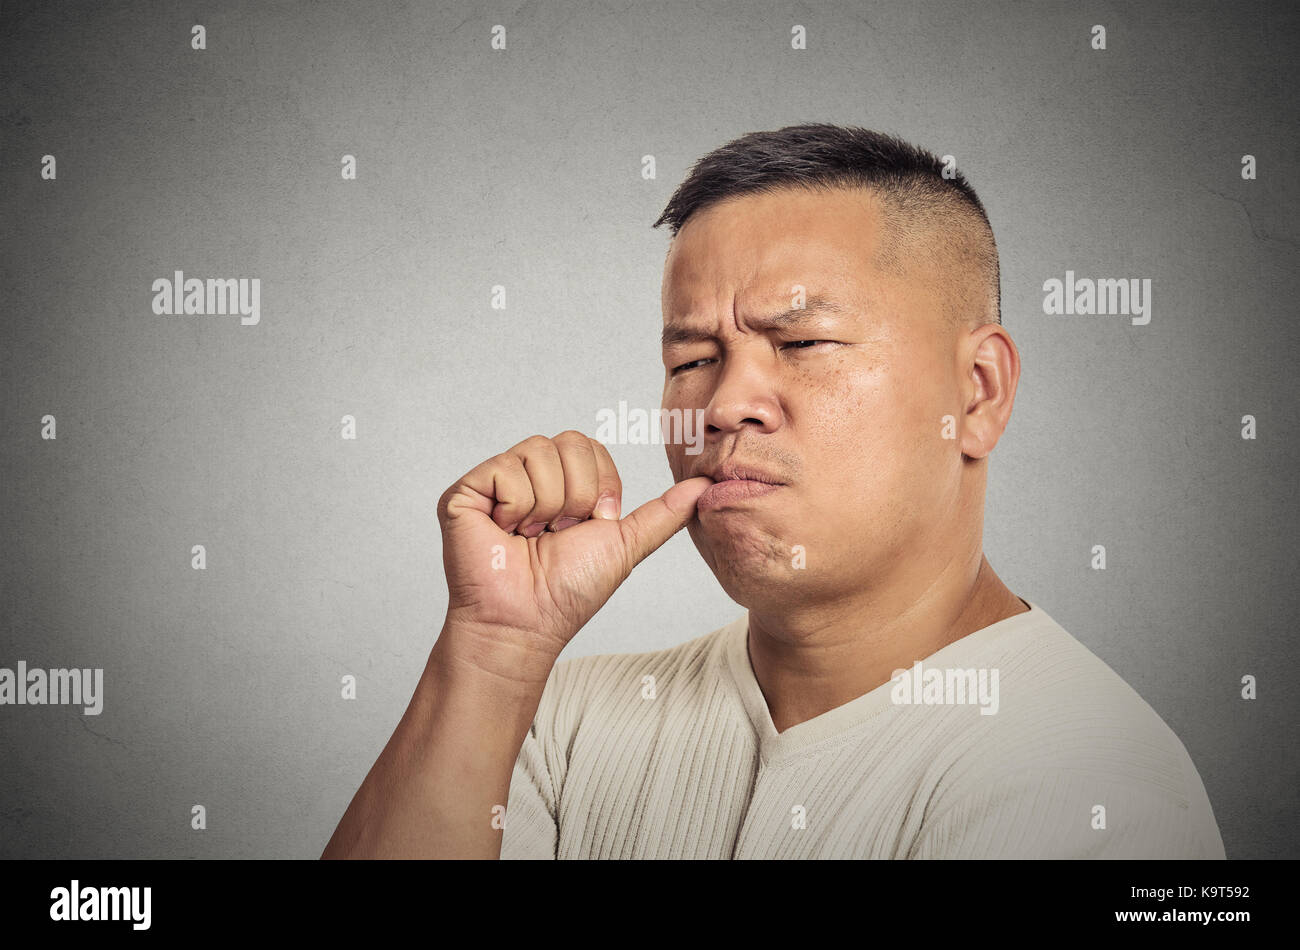 Lazy young man sucking thumb doing nothing isolated on grey wall background. Face expression human emotion Stock Photo